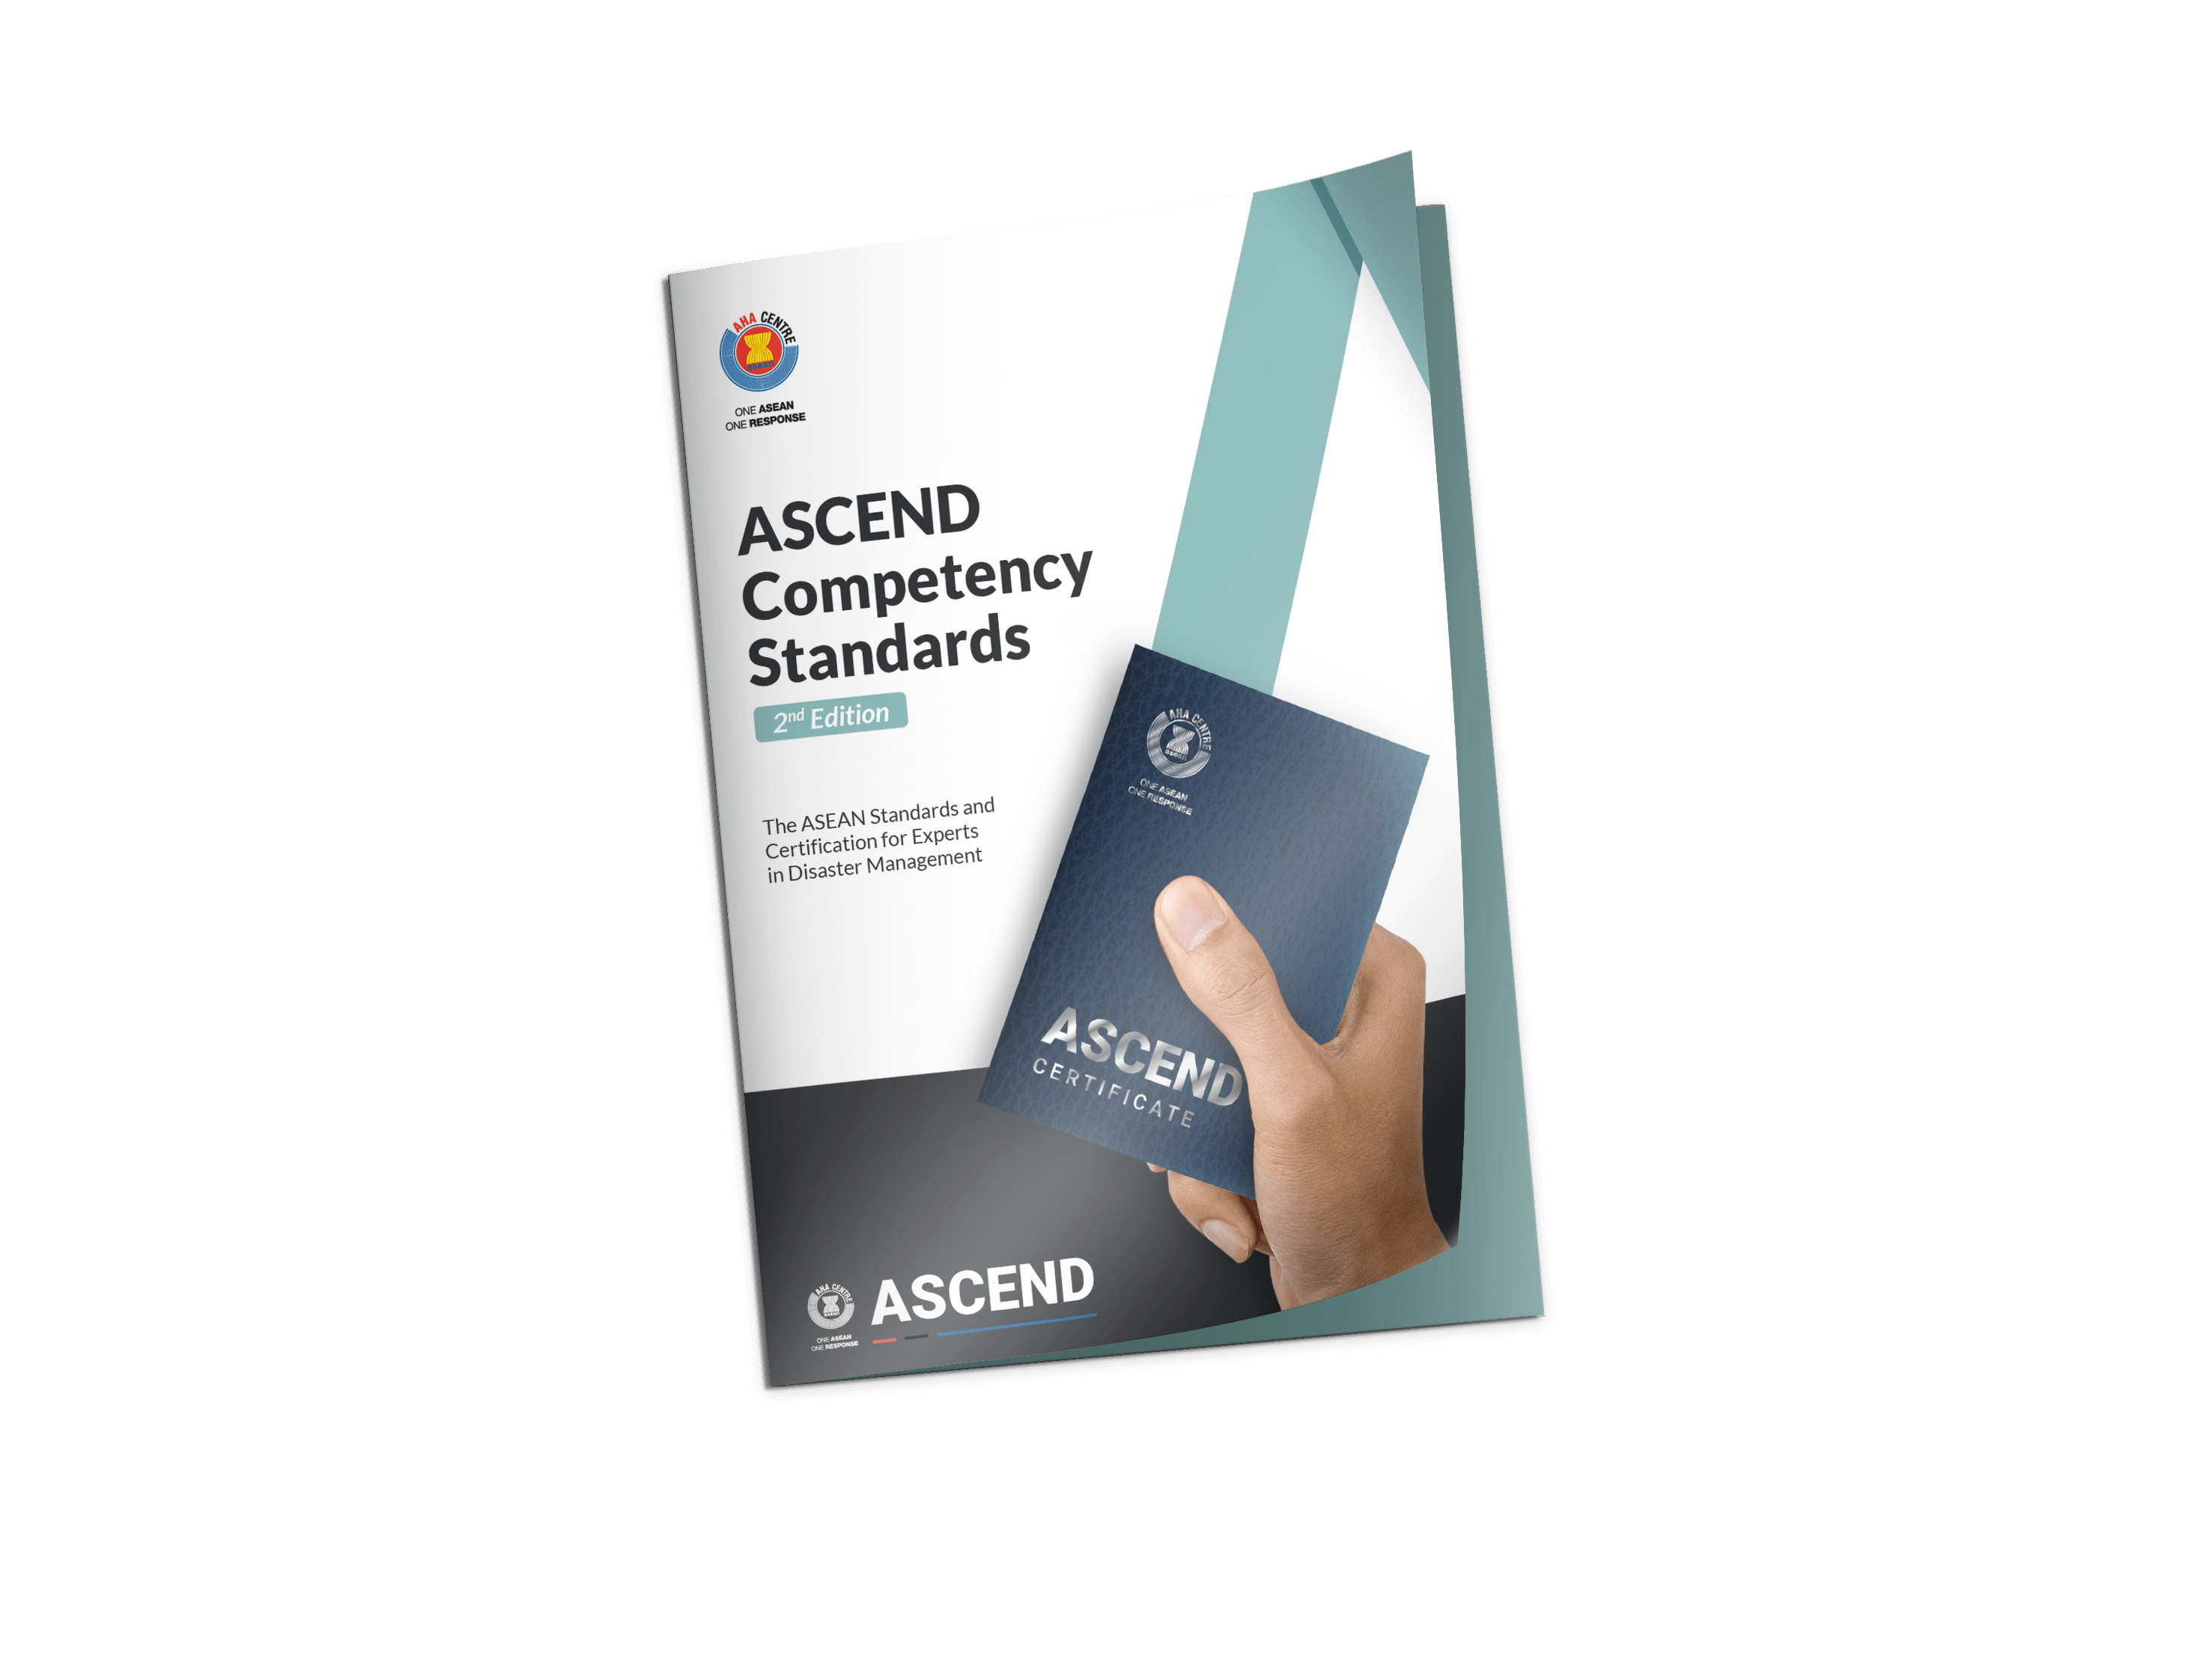 ASCEND Competency Standard 2nd Edition